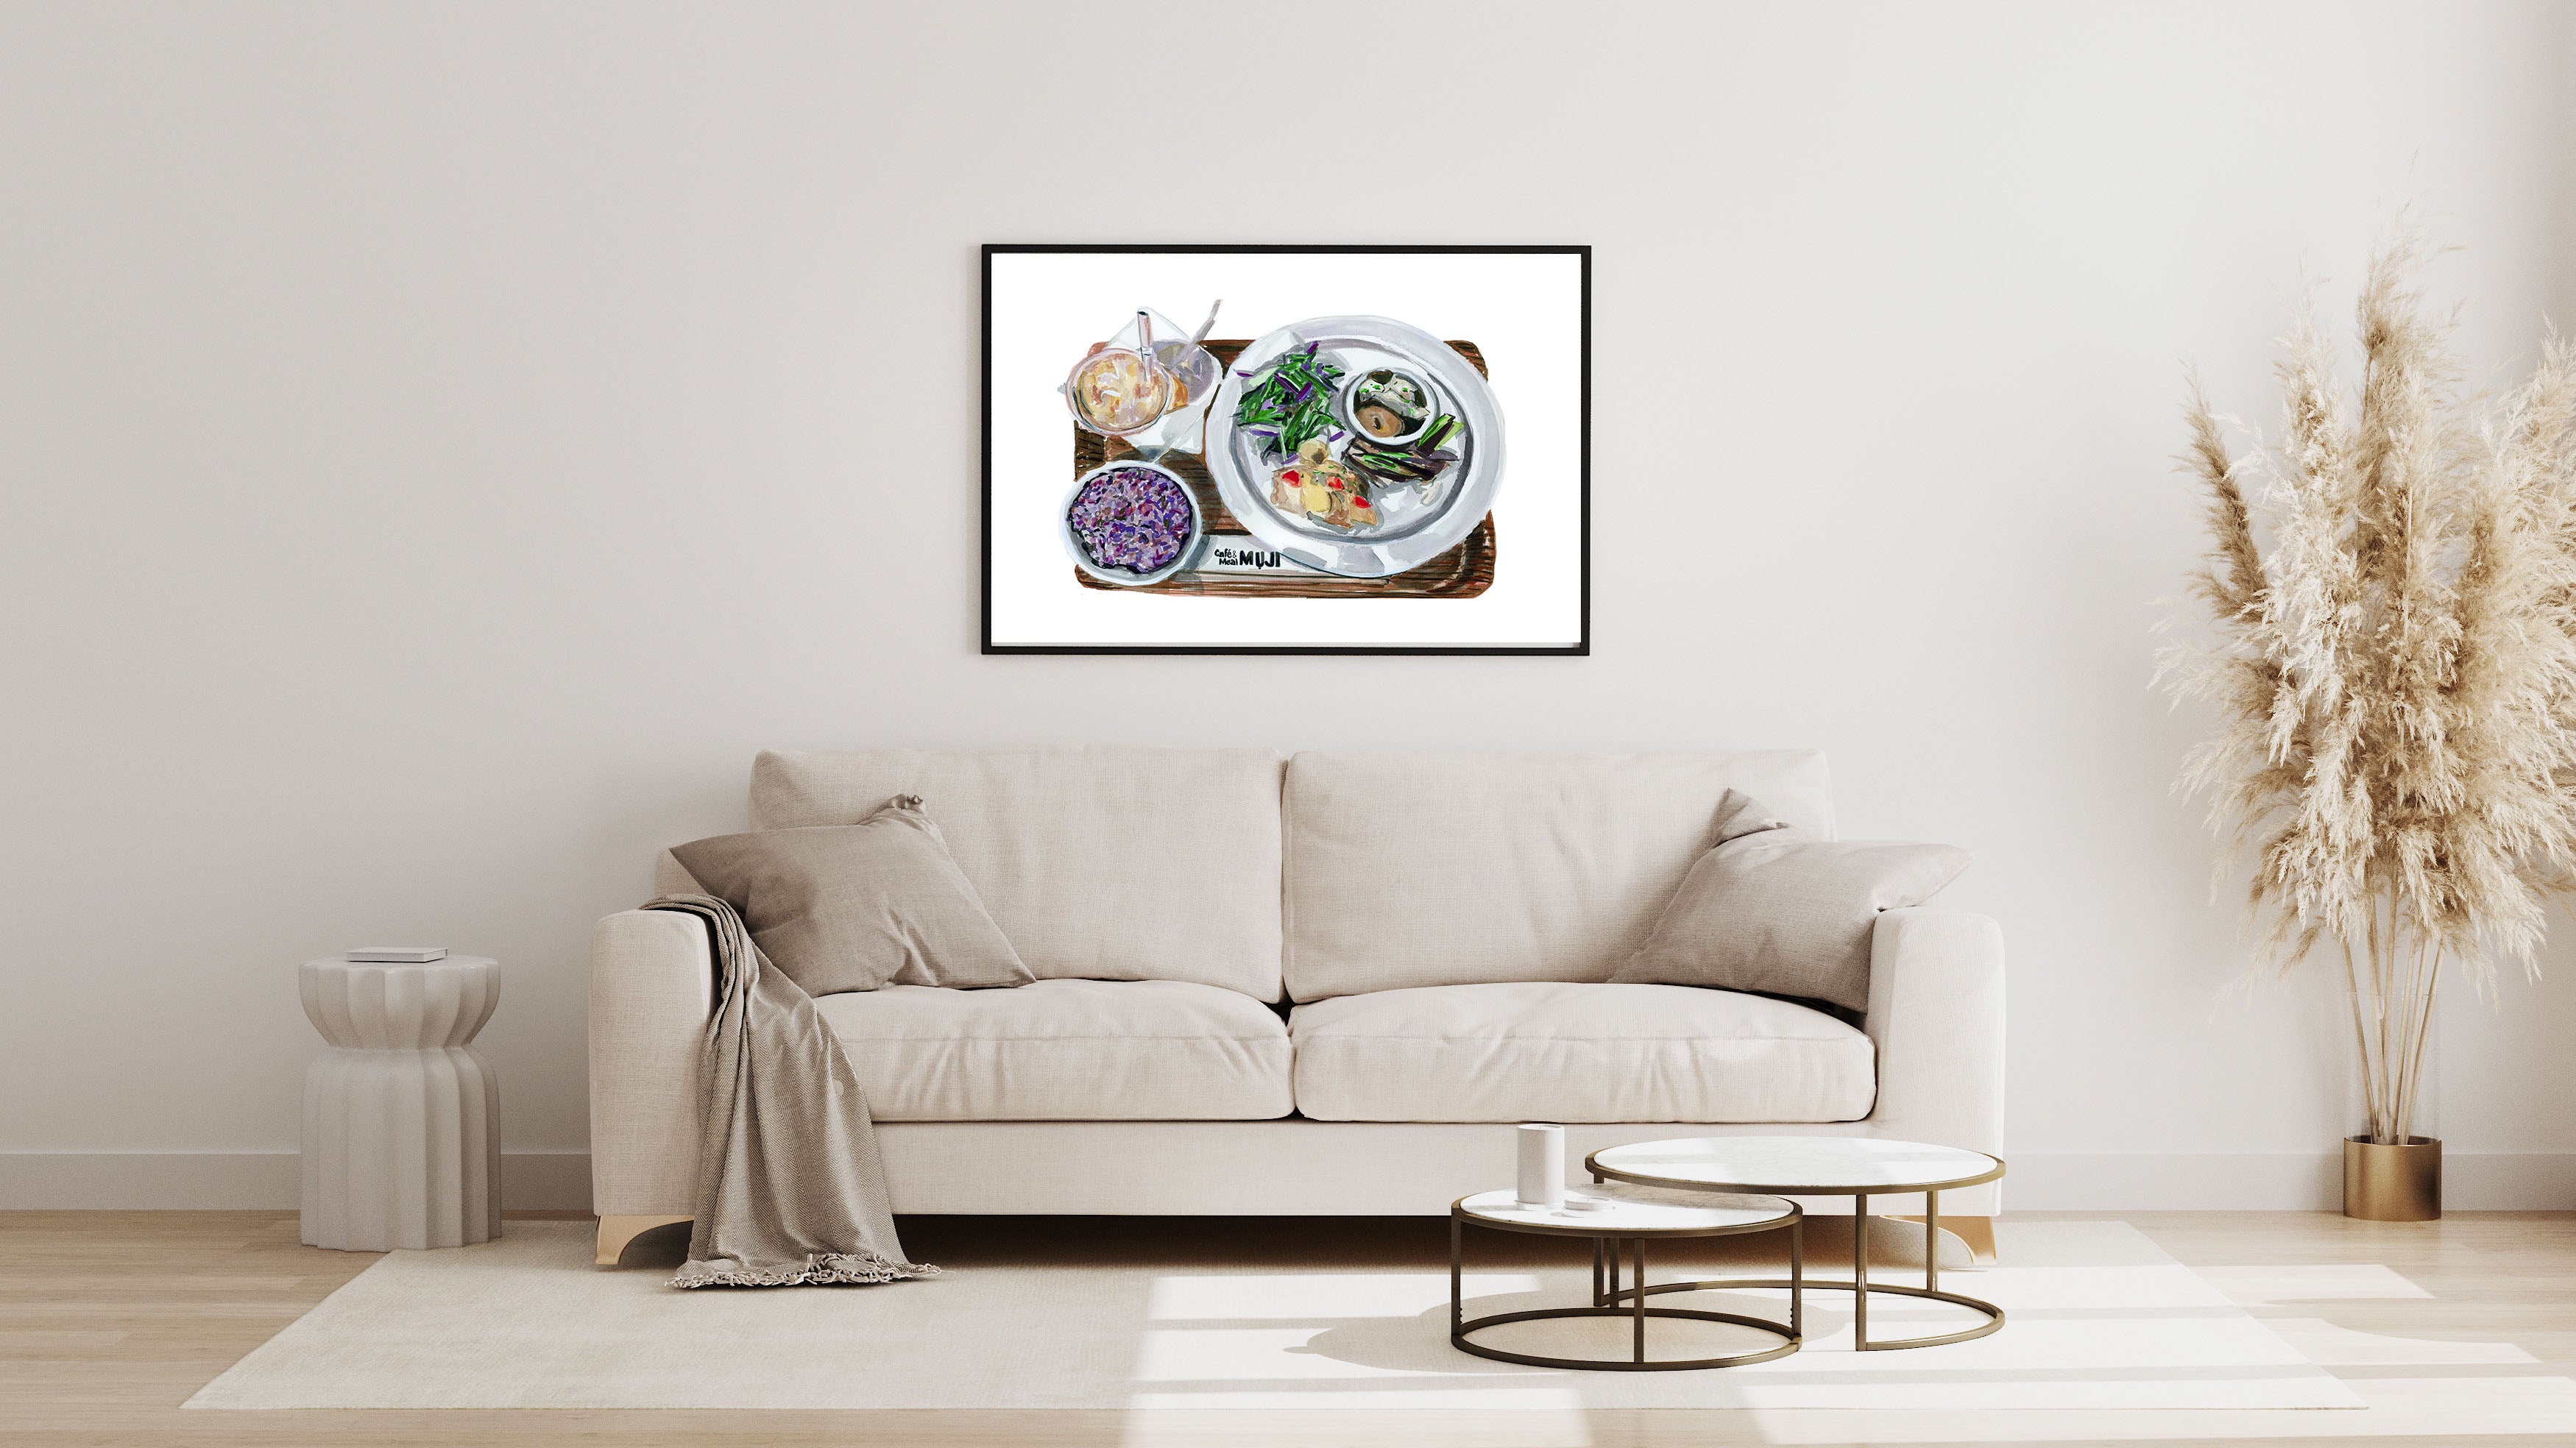 Muji cafe art print of painting by Medjool Studio. Print of original gouache painting inspired by the artist's trip to Hong Kong, where she ate a delicious meal at the Muji Cafe.